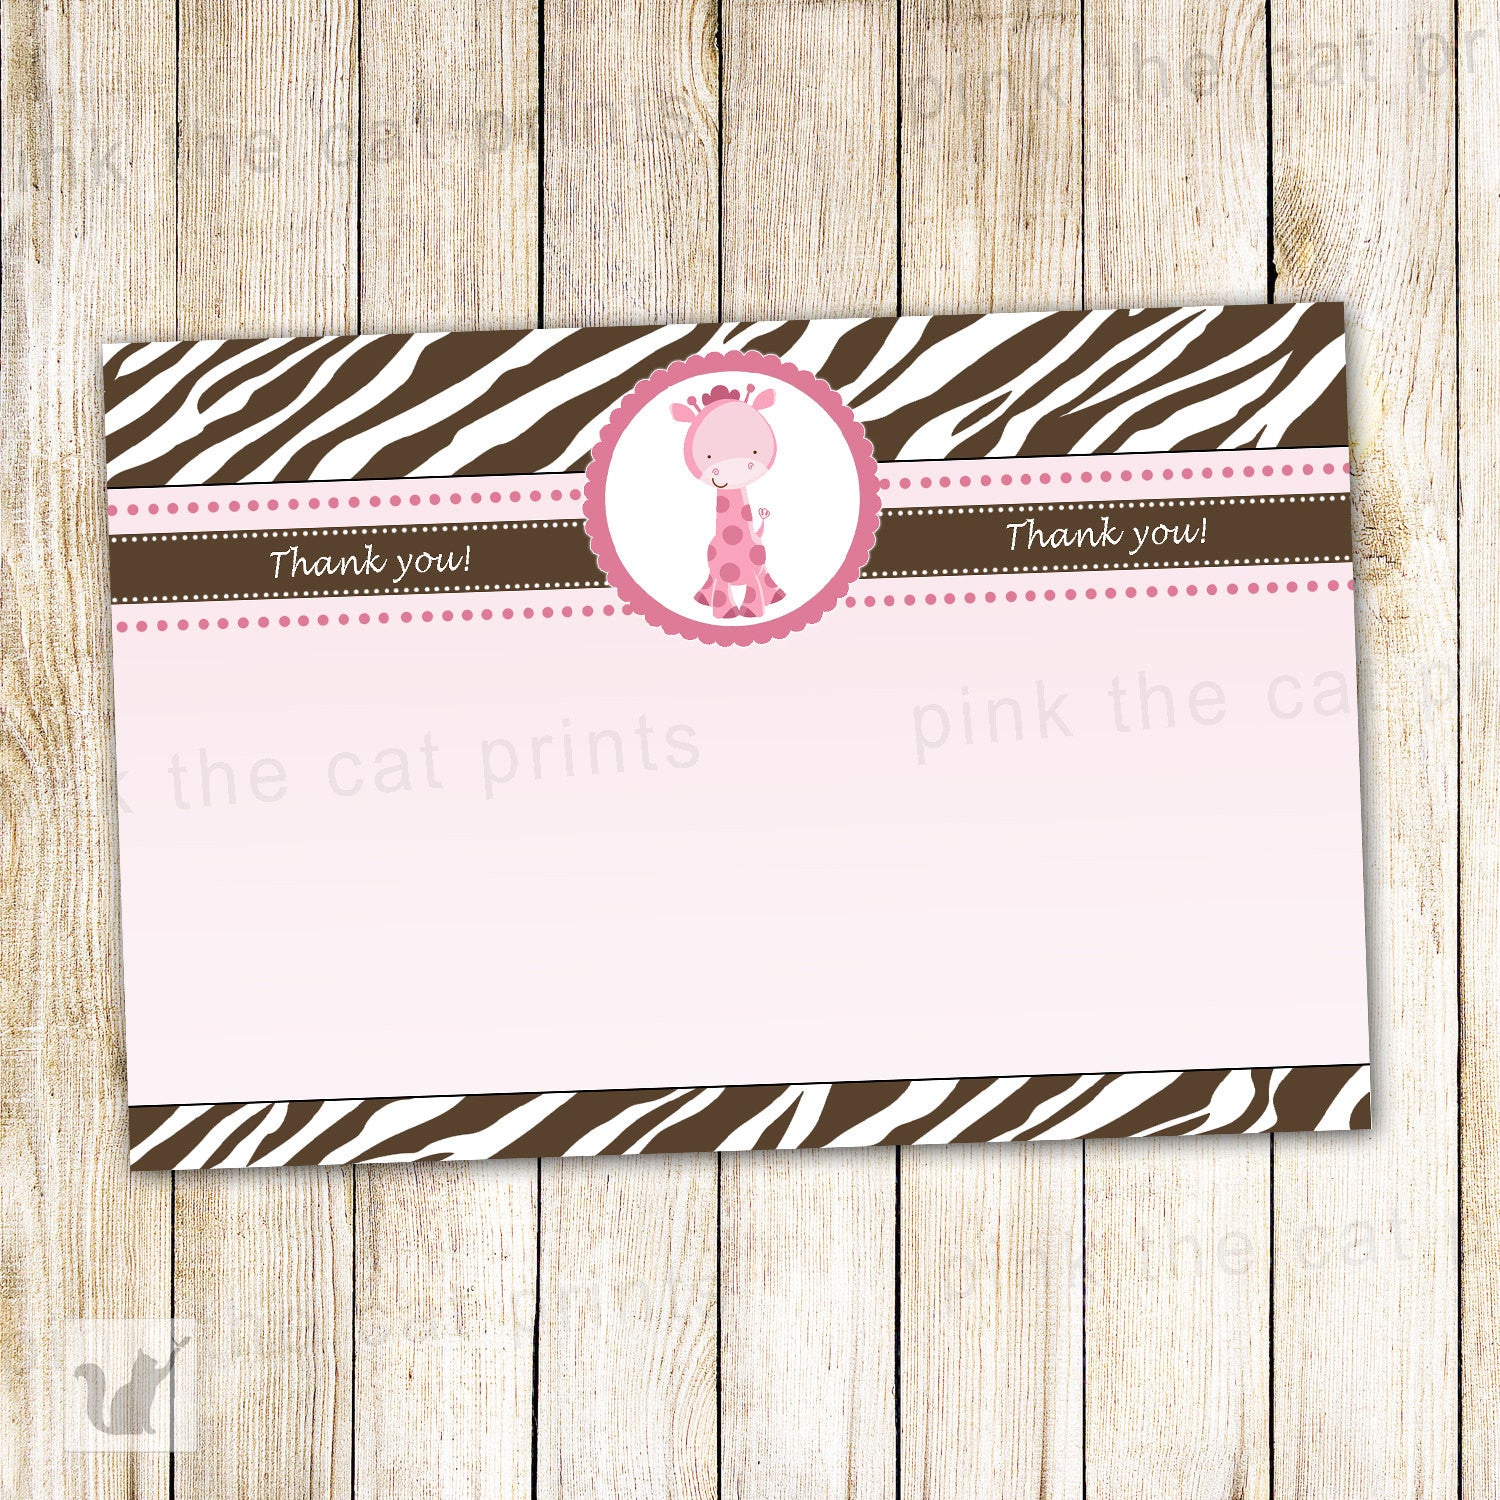 Giraffe Thank You Card - Baby Girl Shower Birthday Party Notes Pink Brown Zebra INSTANT DOWNLOAD